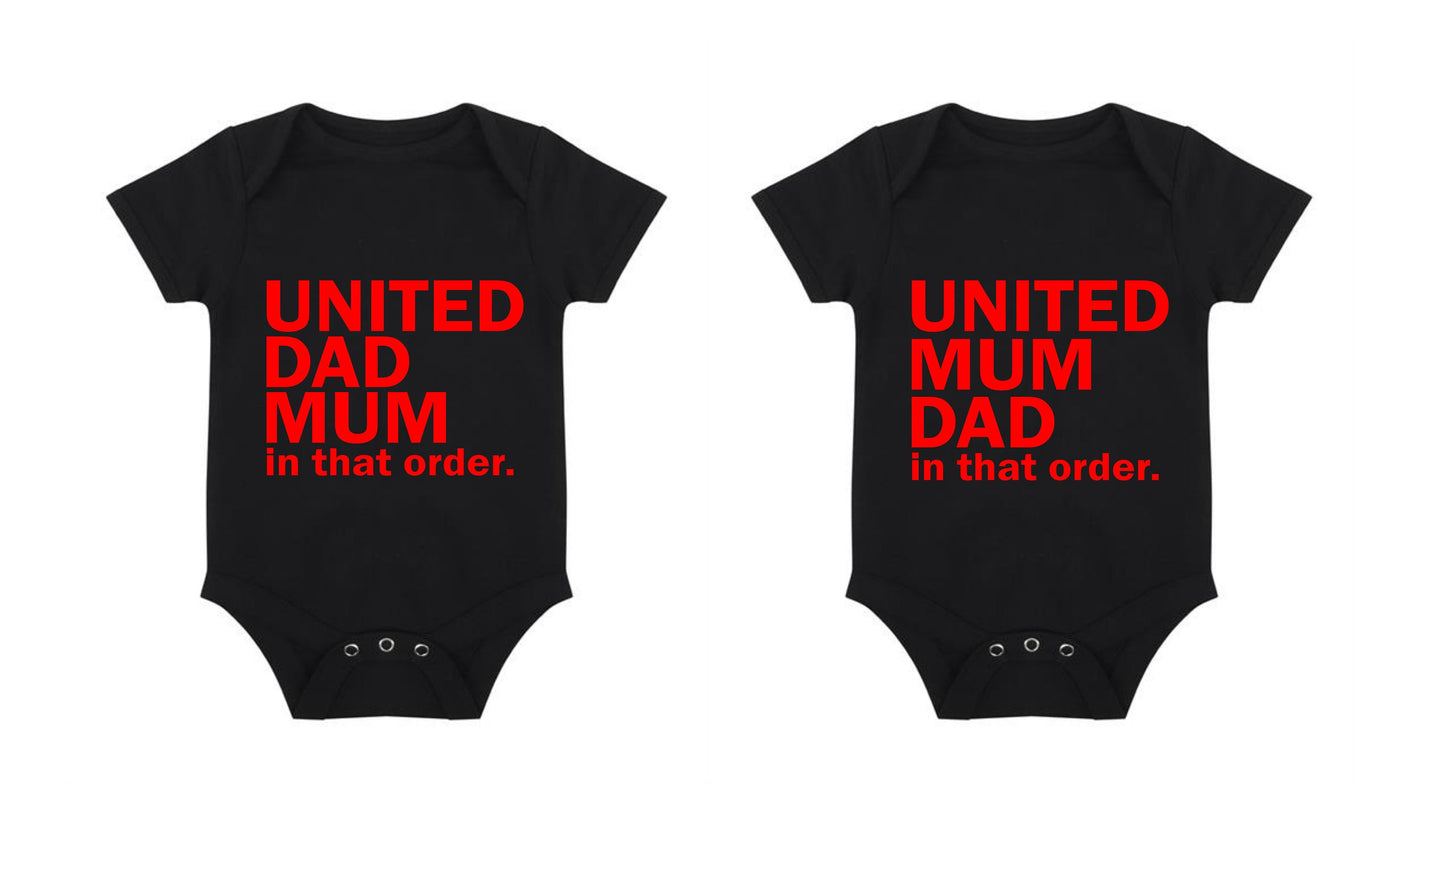 United Dad Mum / United Mum Dad in that order - Childrens Manchester short sleeved baby suit babygrow